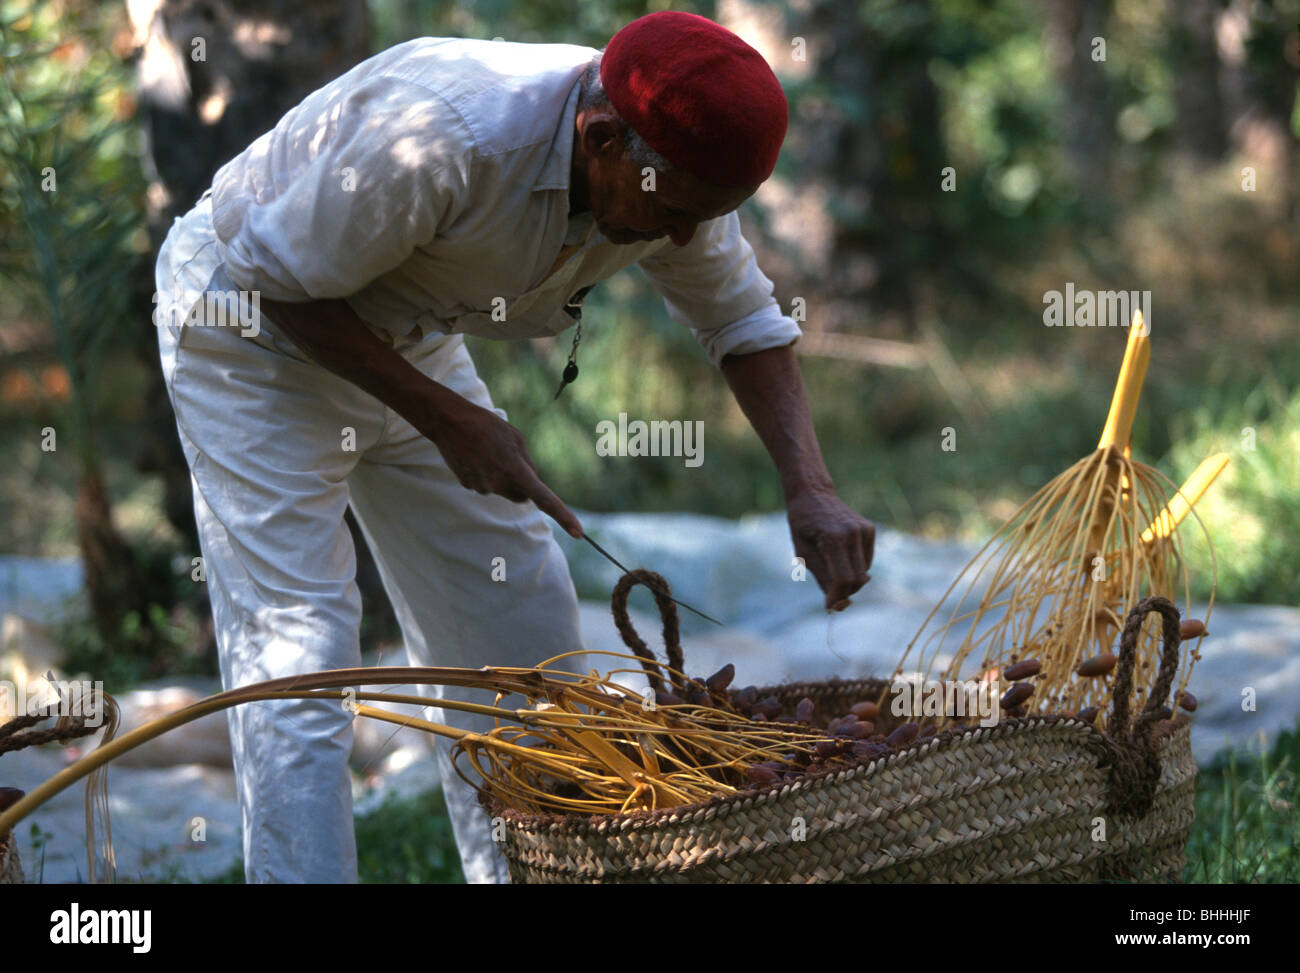 A Tunisian date harvester sorting dates into a large basket, in an oasis palmerie, Tozeur, Tunisia. Stock Photo